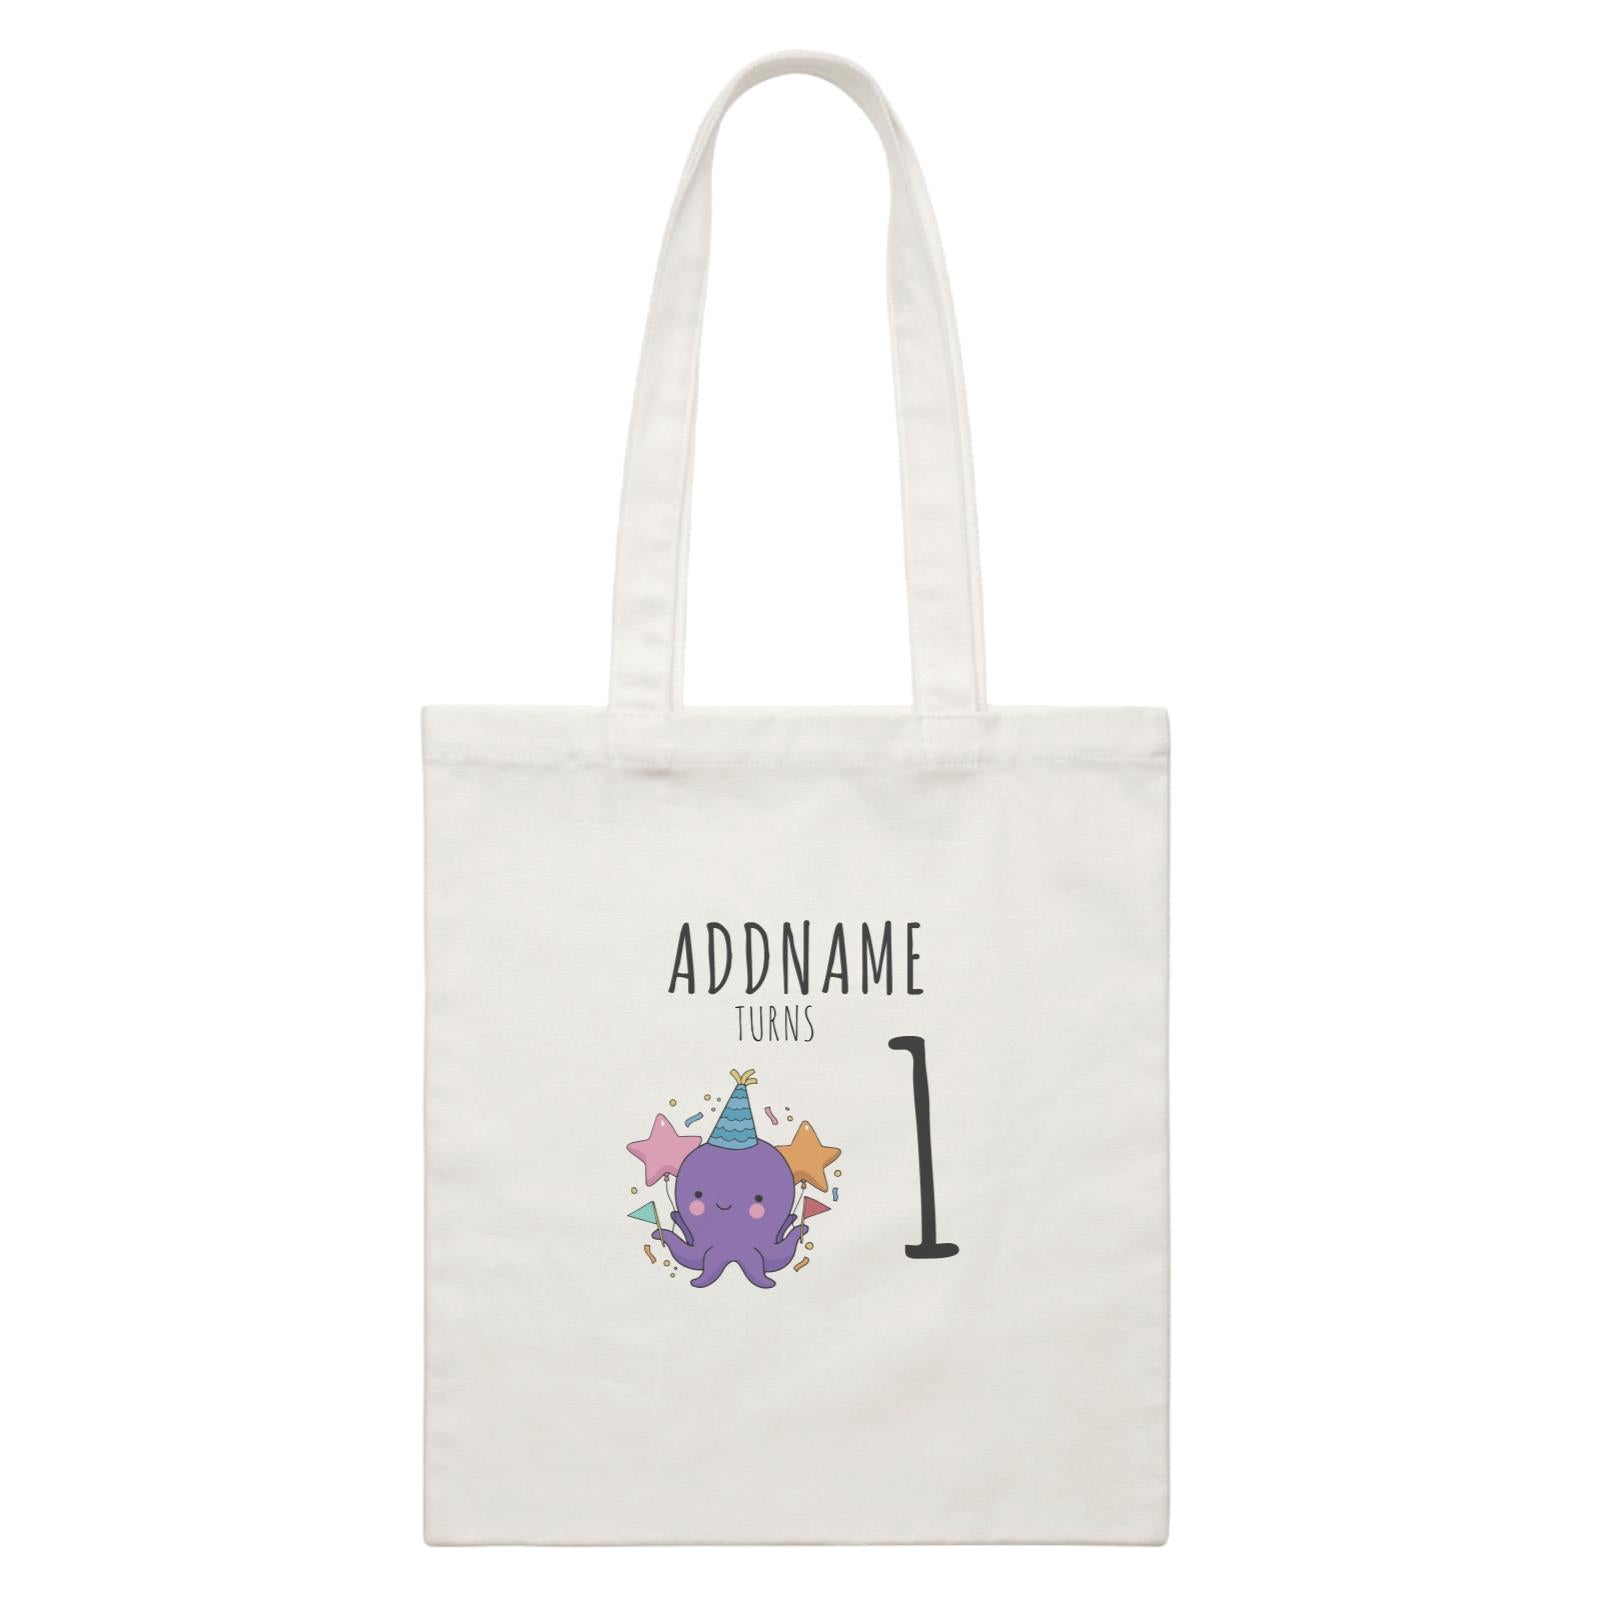 Birthday Sketch Animals Octopus with Flags Addname Turns 1 White Canvas Bag